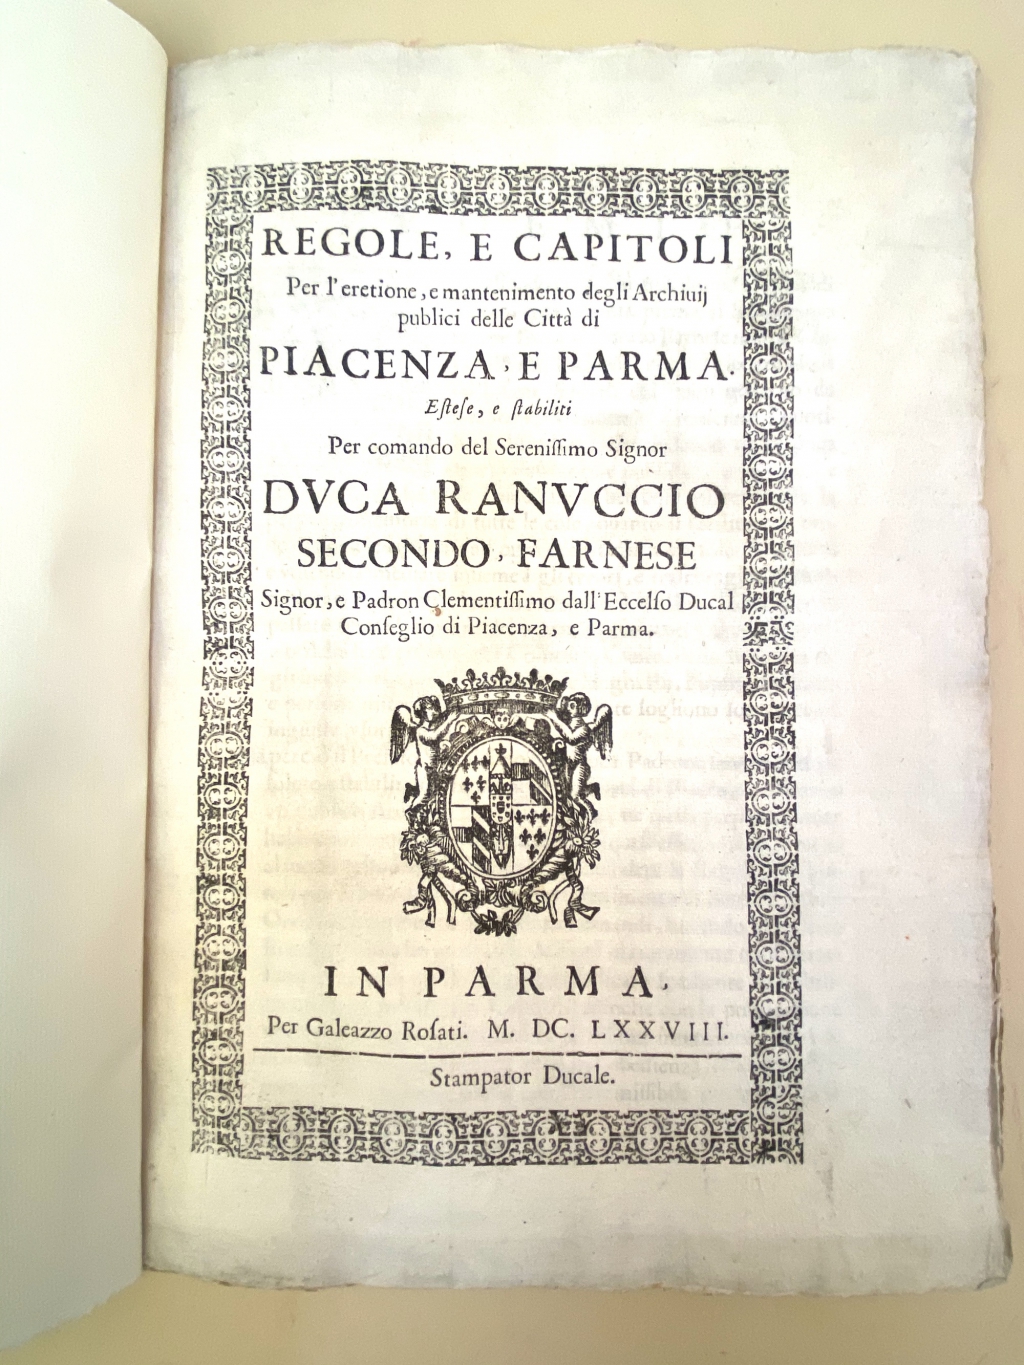 Parma rules for archive operation 1678